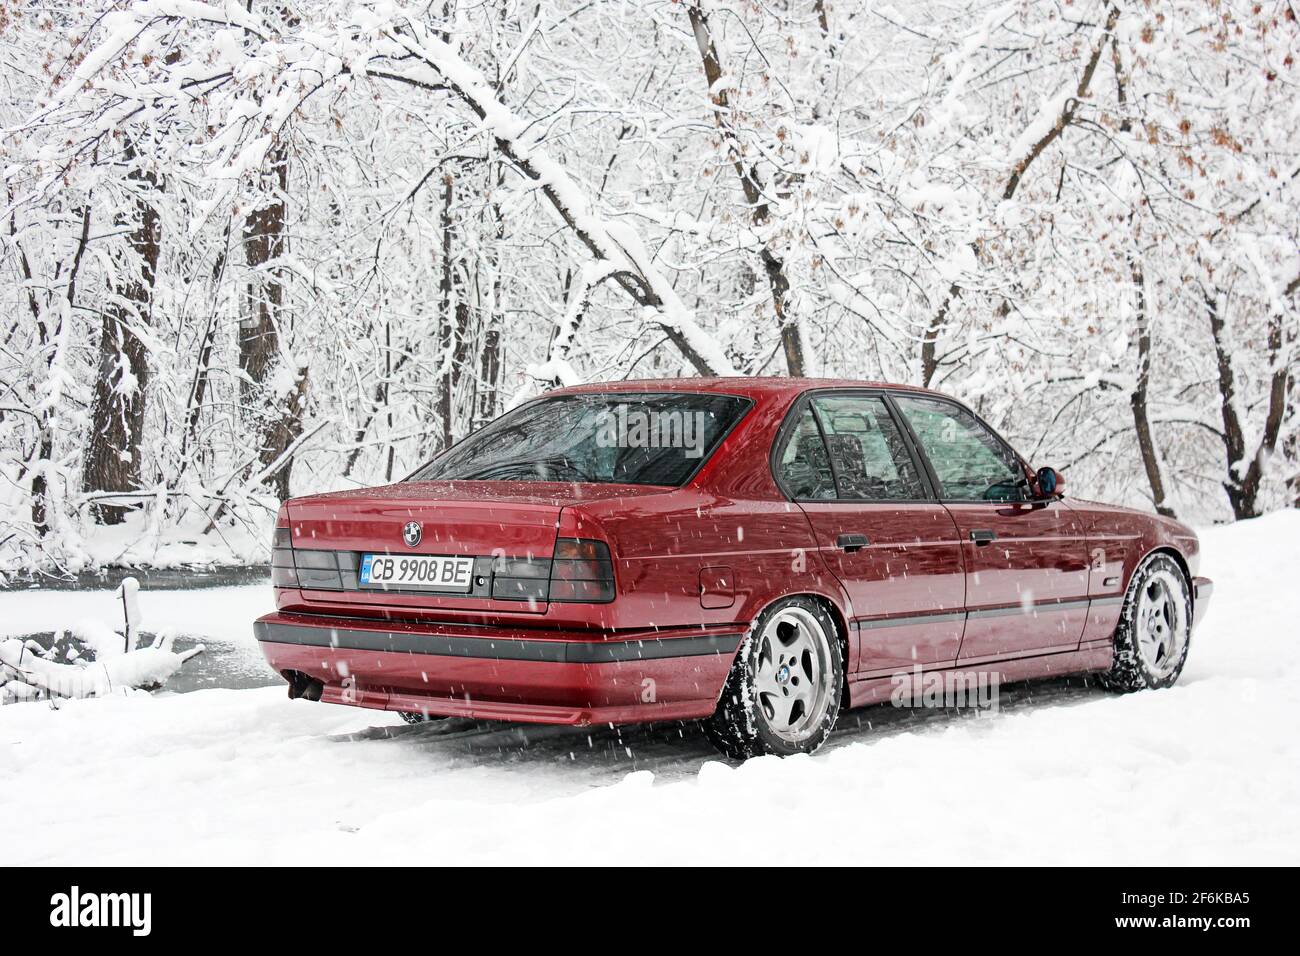 Chernigov, Ukraine - December 21, 2017: BMW 520 (E34) in the winter forest. Red BMW in a beautiful forest. Nature. Snow Stock Photo